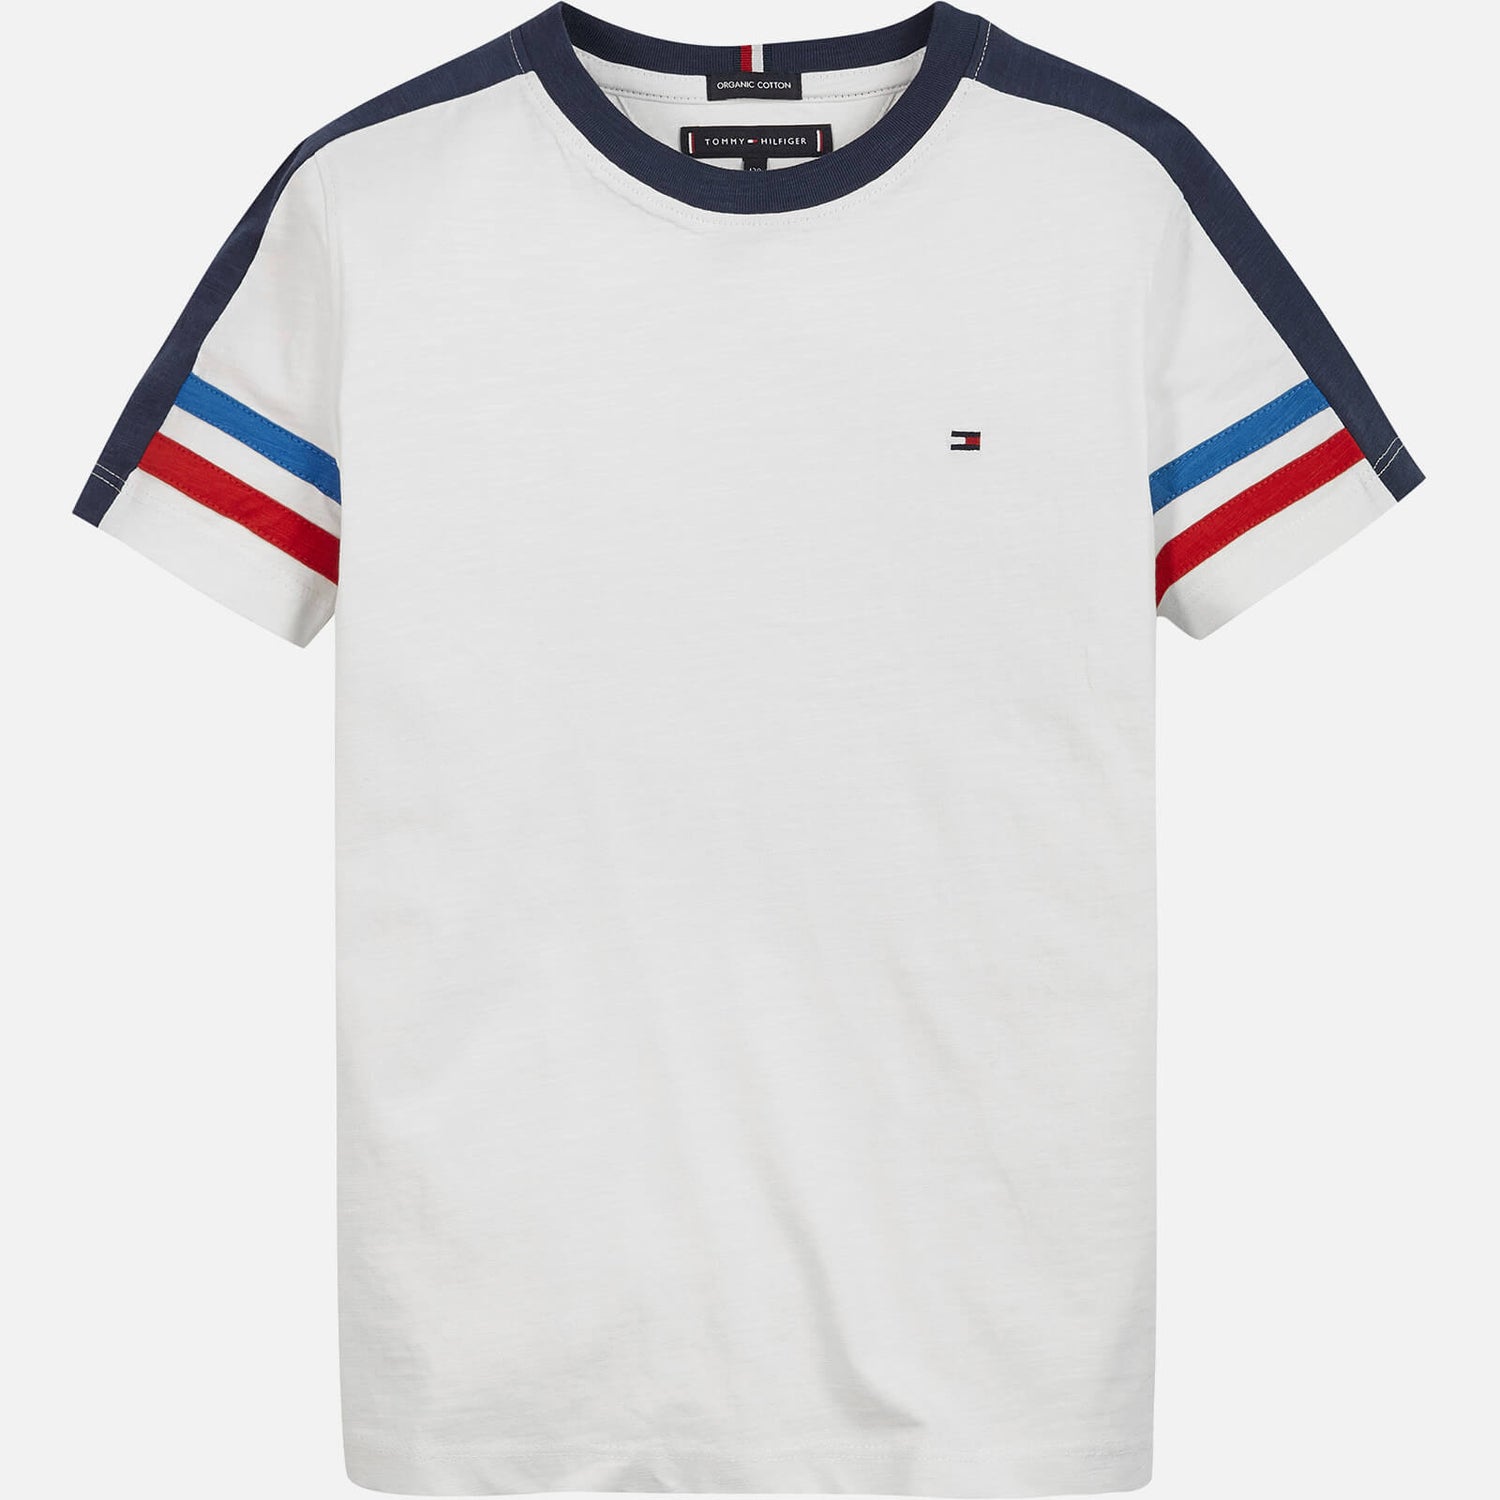 Tommy Hilfiger Boys Varisity Sleeve Detail T-Shirt - White - 8 Years